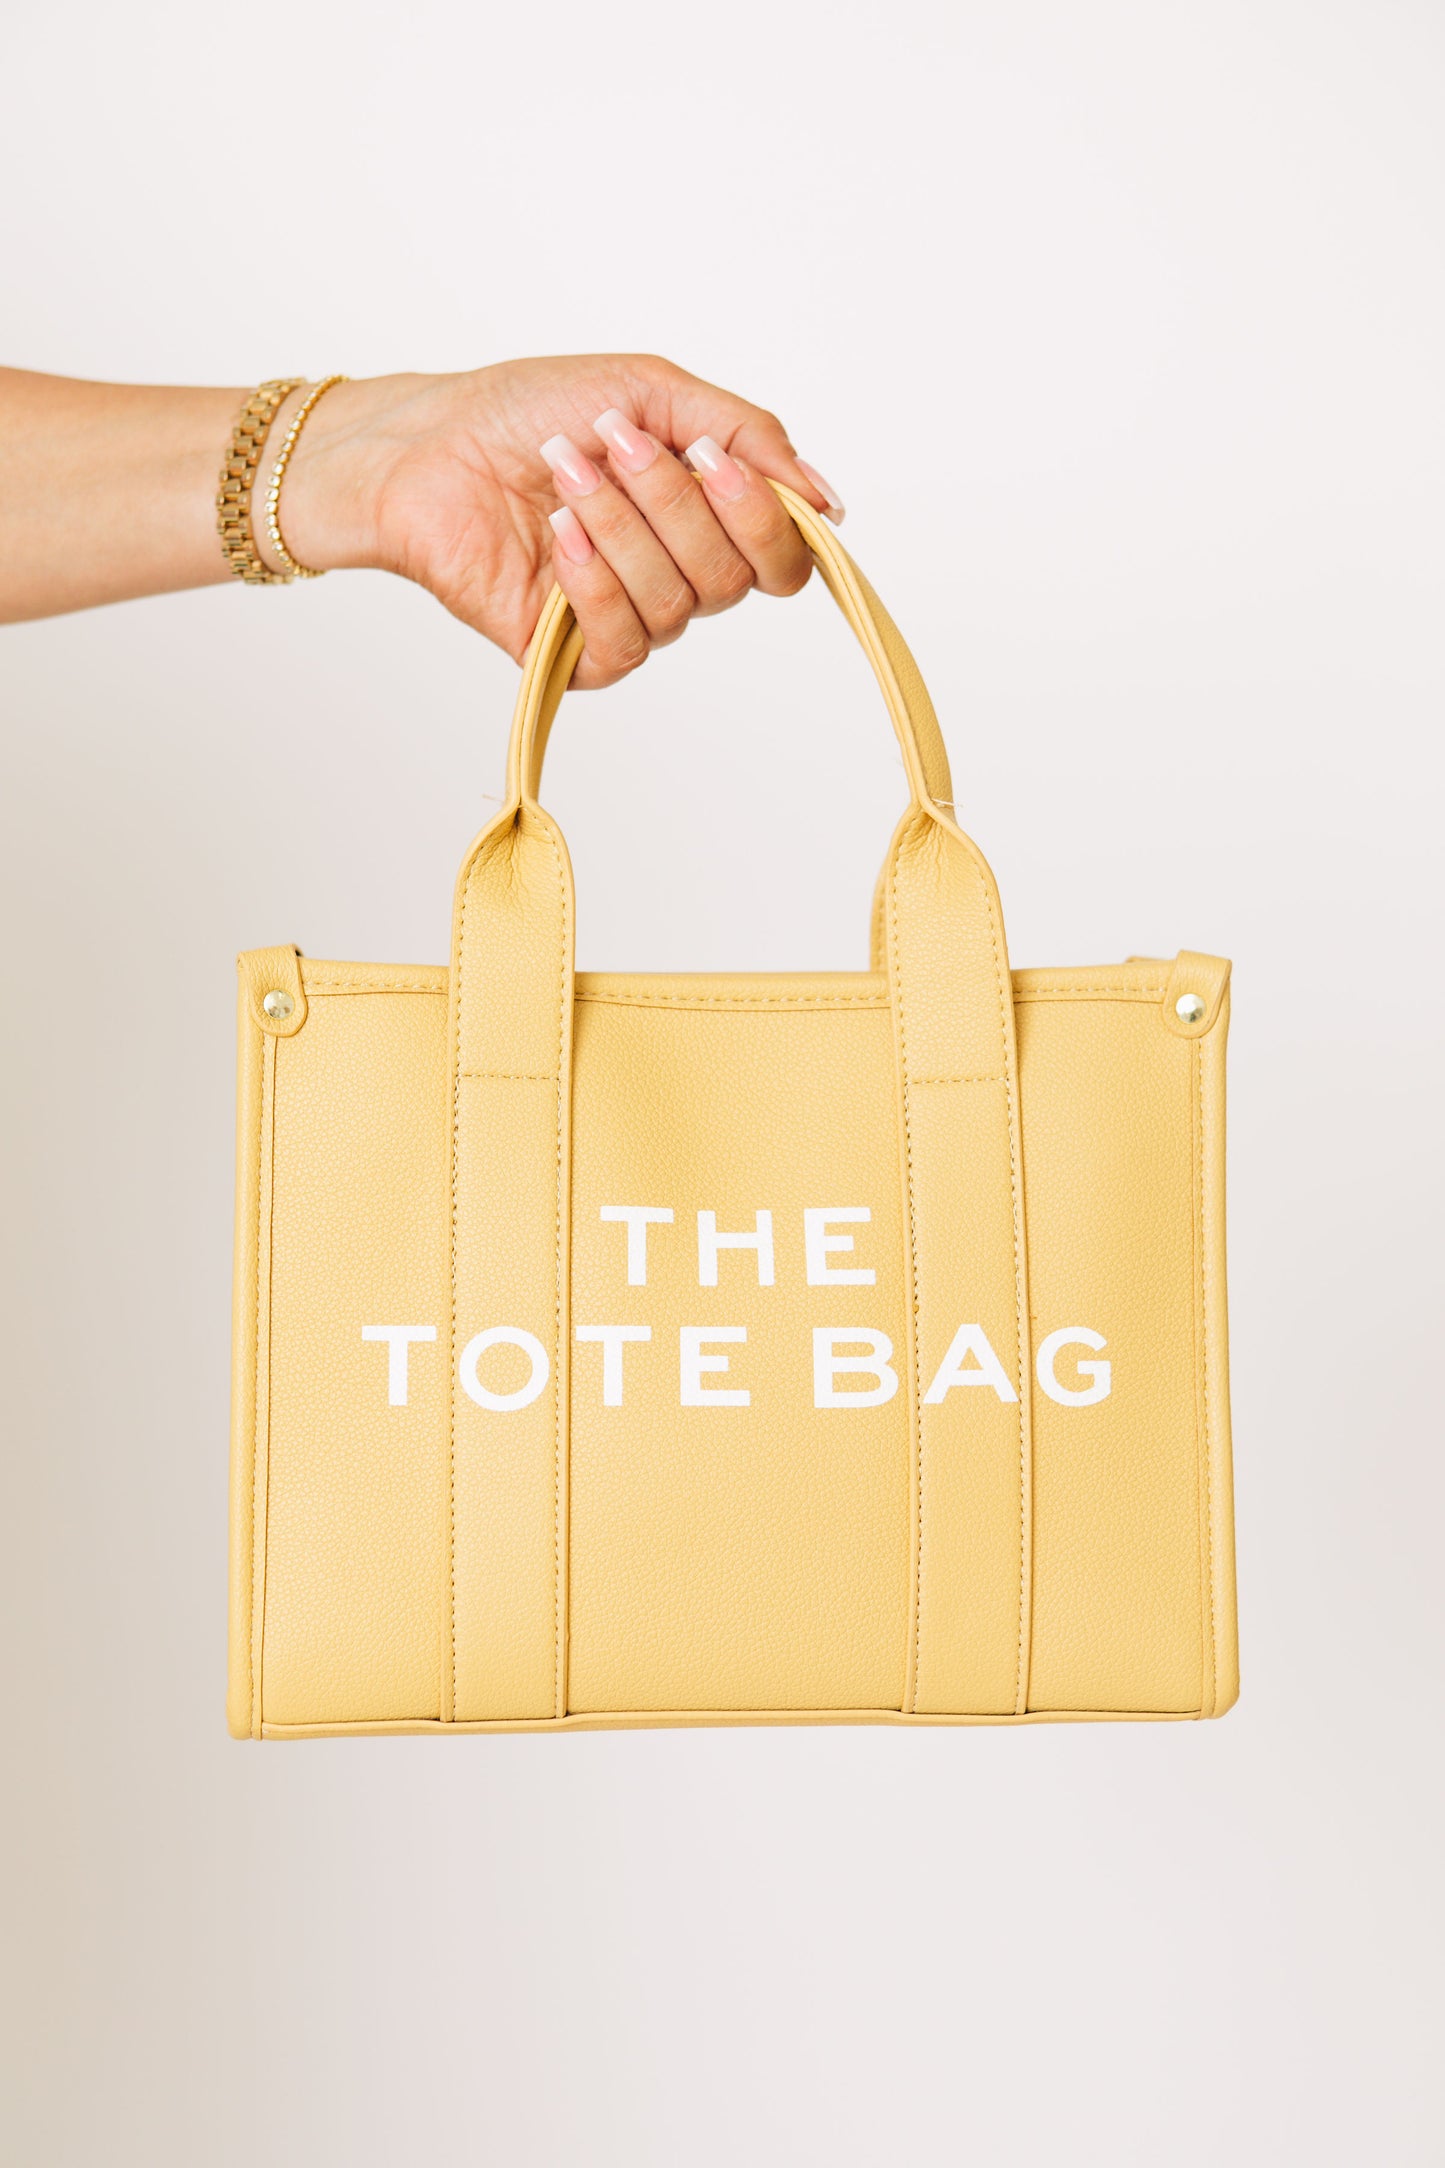 RESTOCKED - The Tote Bag Leather Crossbody Bag